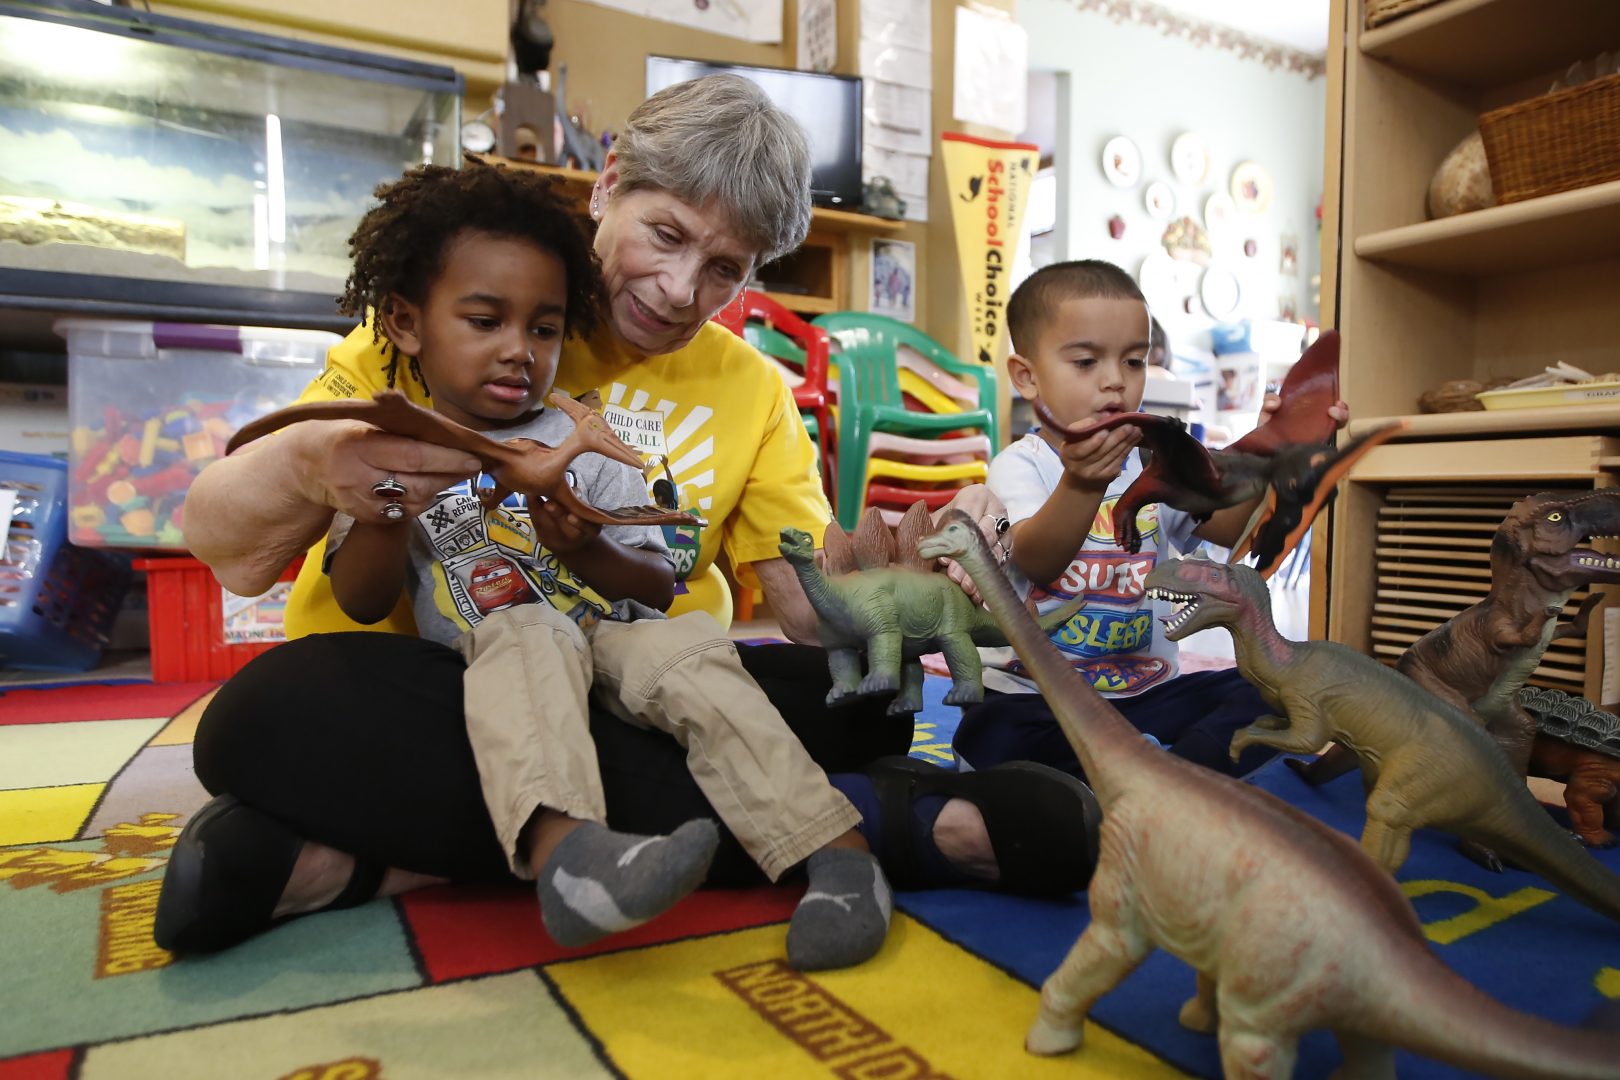 Child care provider Pat Alexander helps children, Isaiah, left, and Hector, right, identify various types of dinosaurs at her child care center in Elk Grove, Calif., on Wednesday, Feb. 26, 2020.